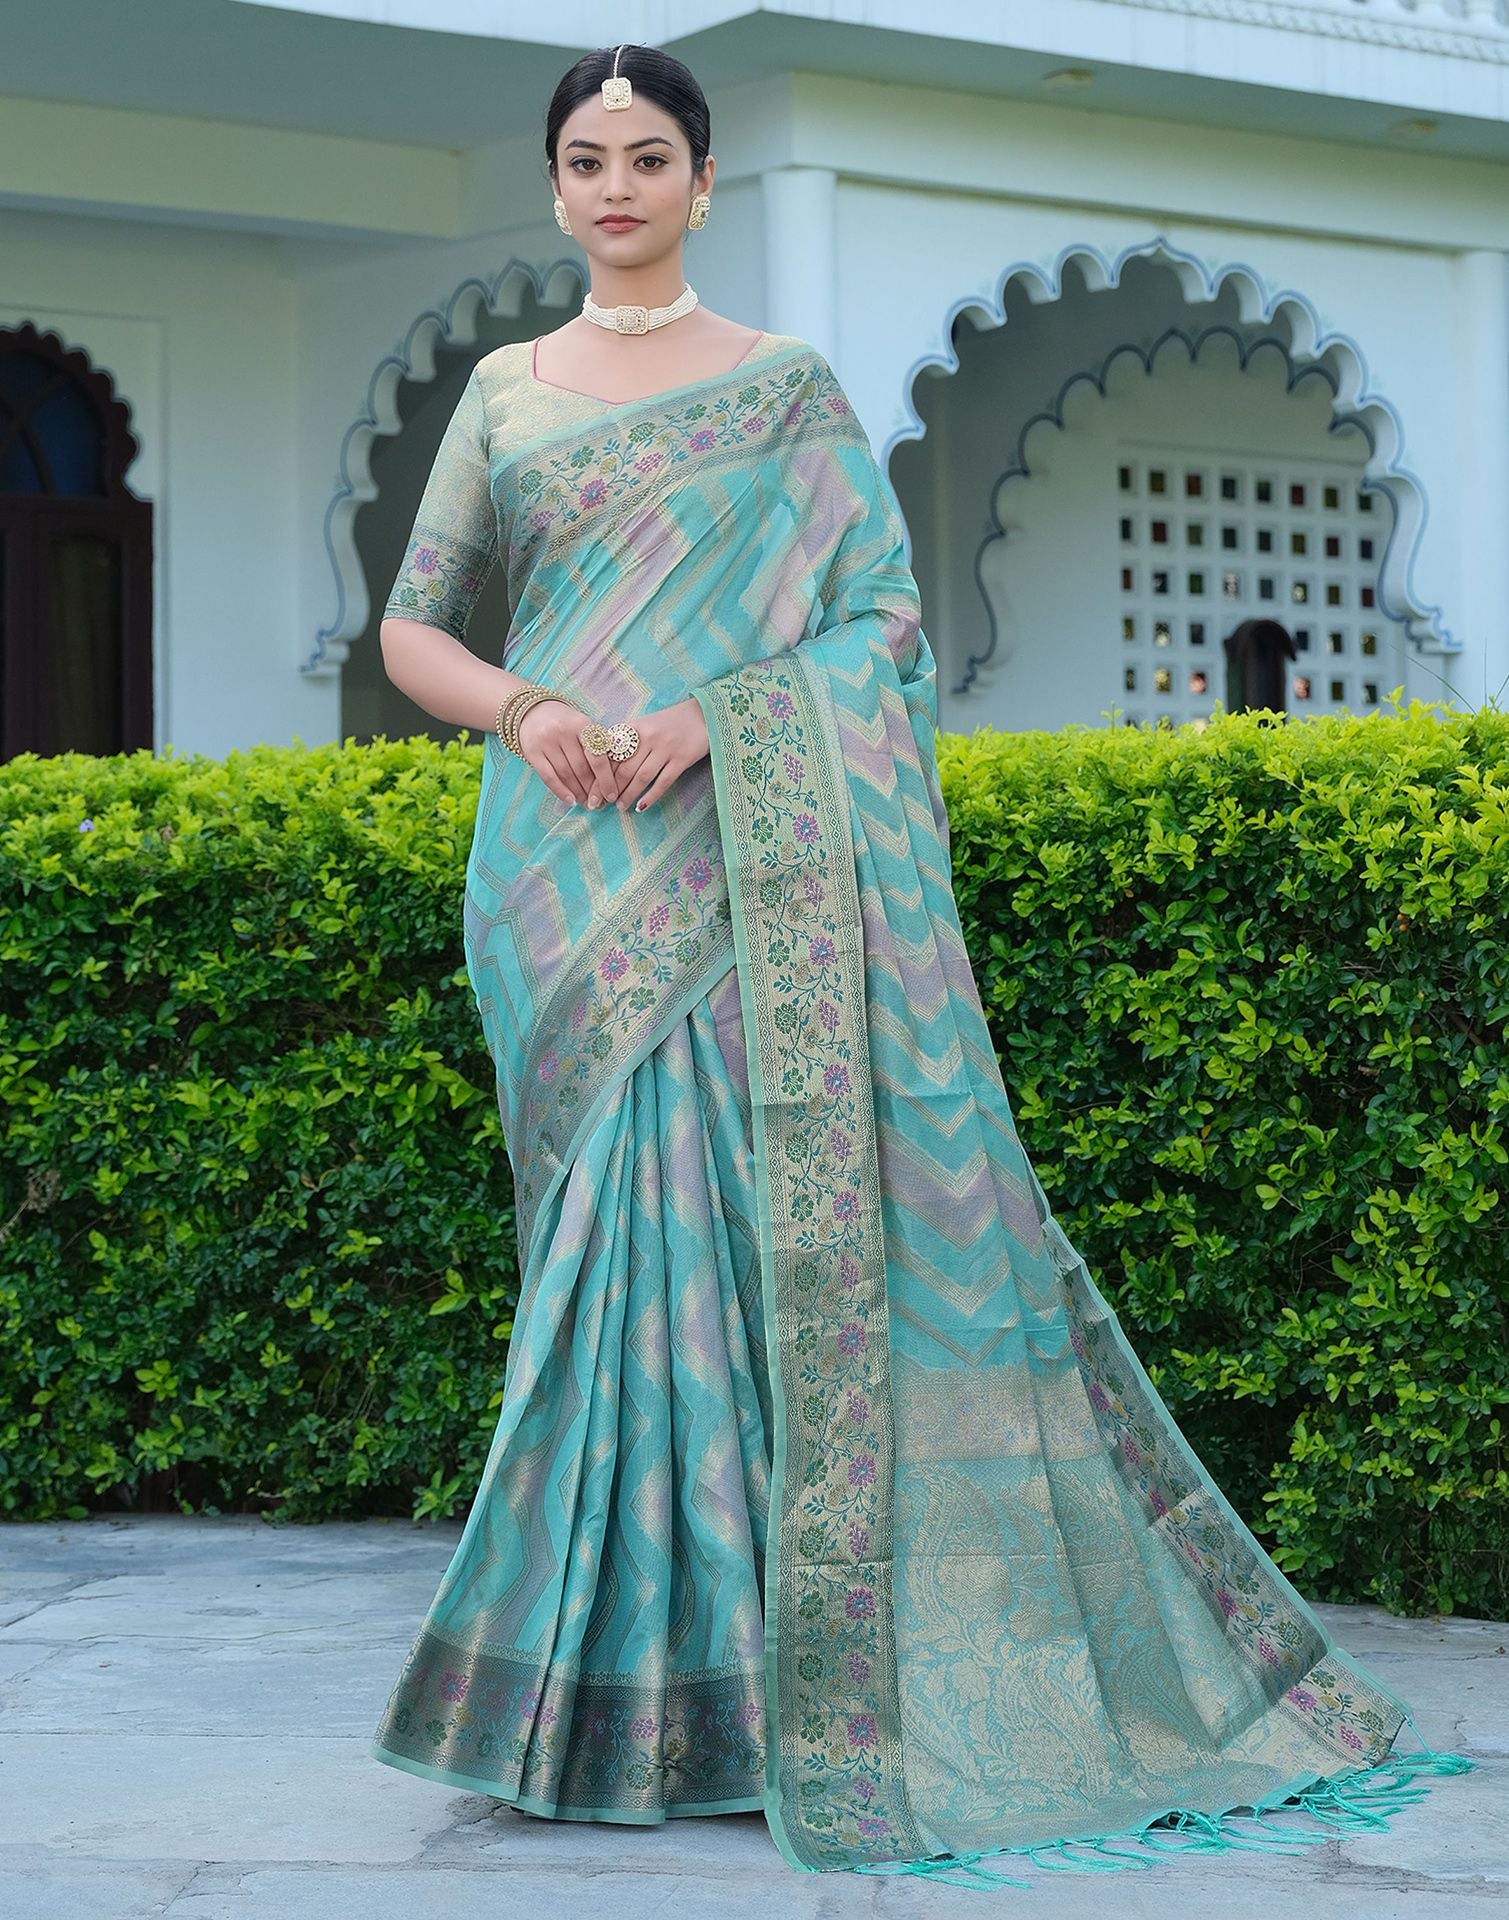 New) Organza Sarees Wholesale Suppliers Surat - Rs.549